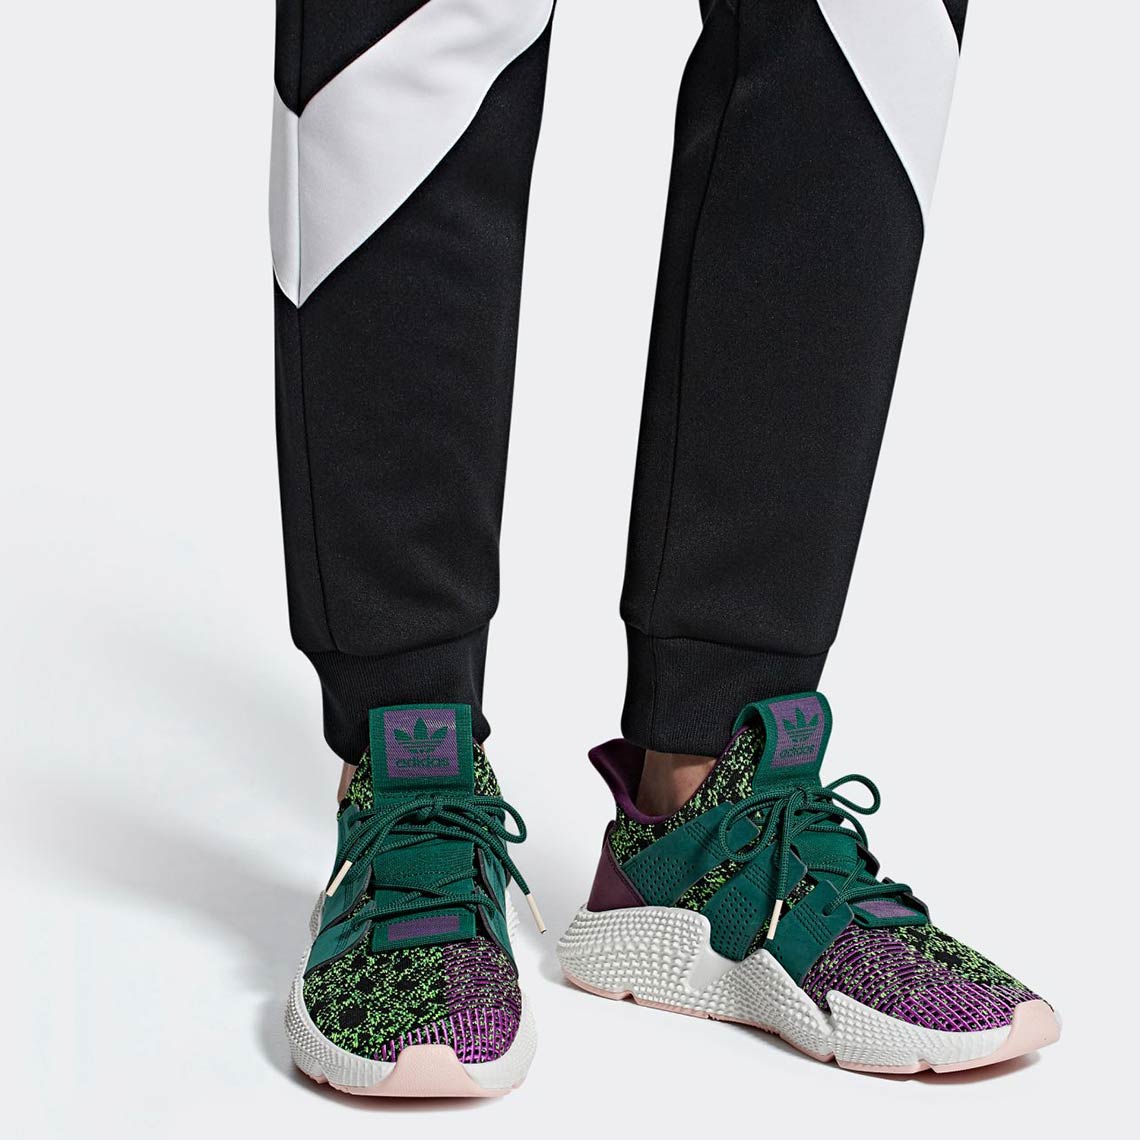 Dragonball Z x adidas Consortium Prophere Cell-10